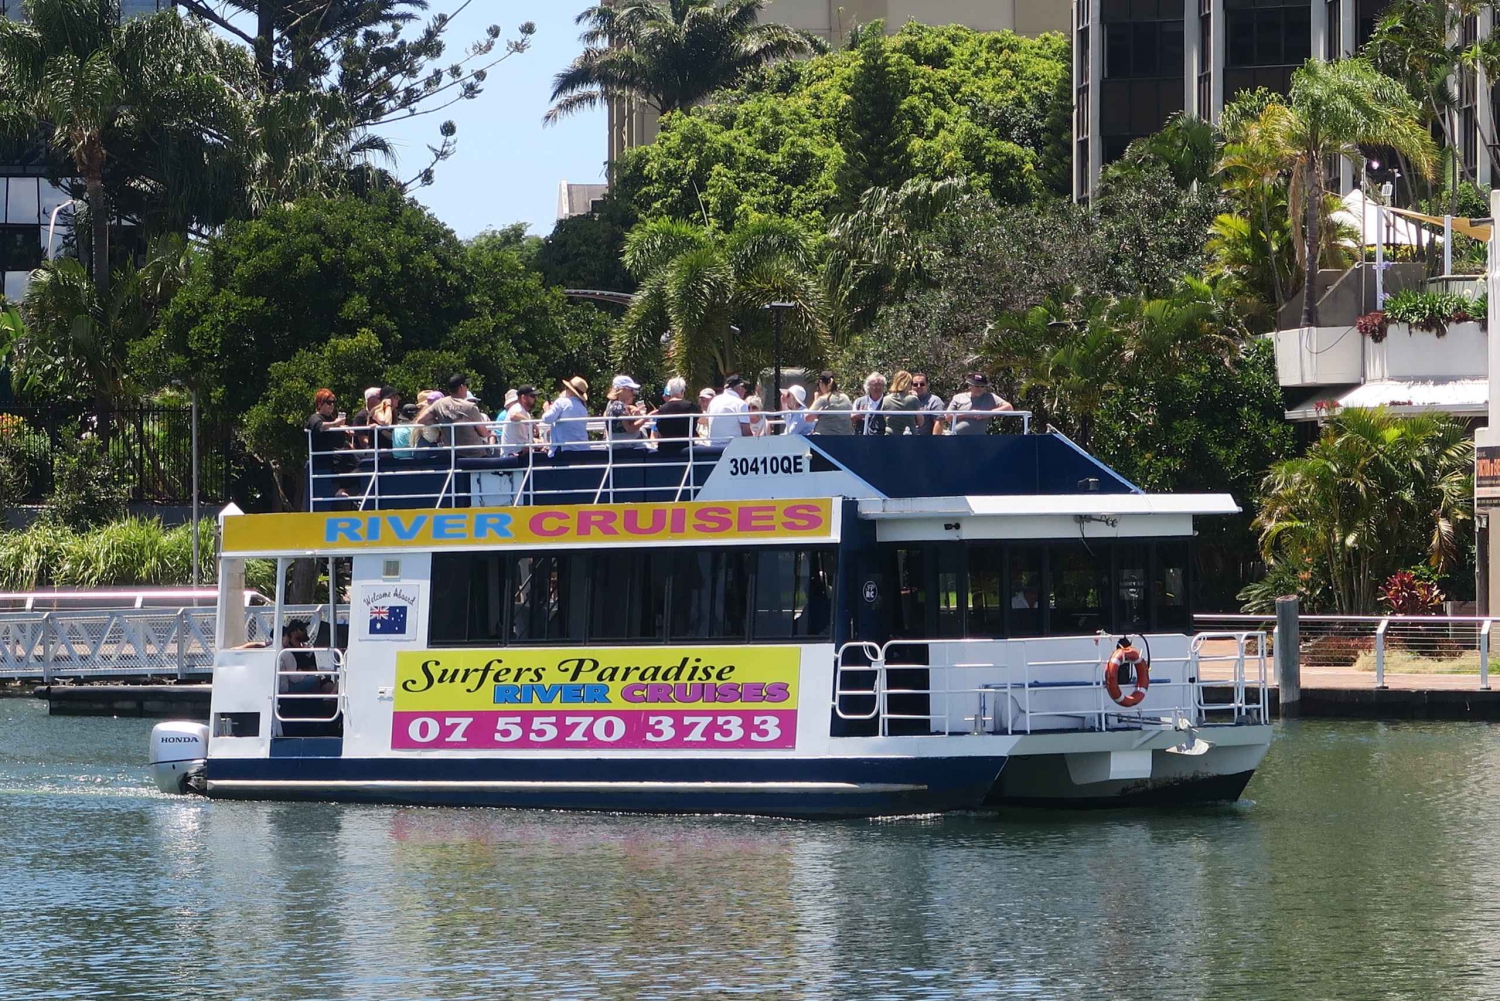 Surfers Paradise: Gold Coast Afternoon River Cruise 4pm